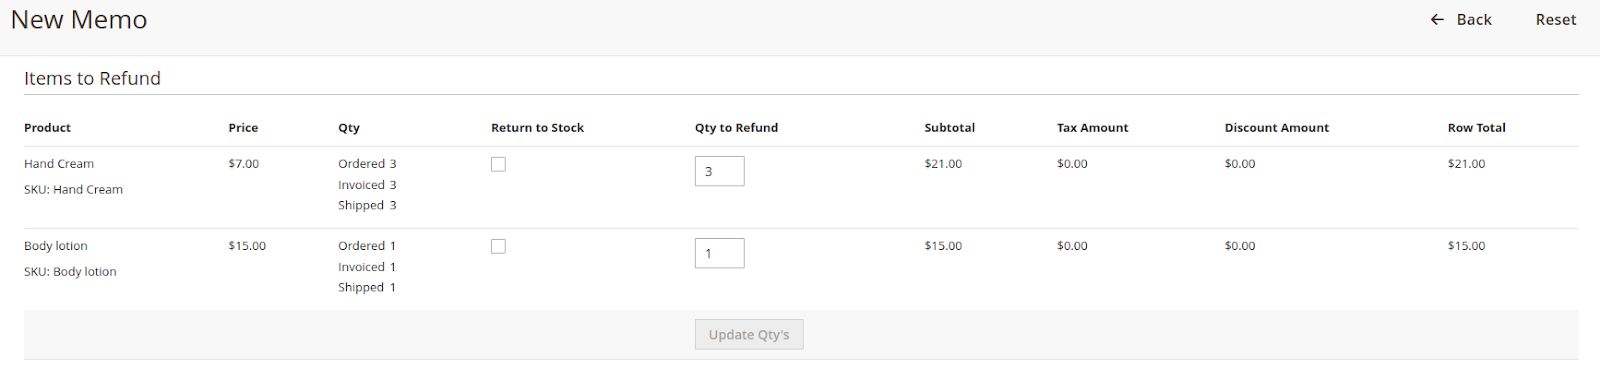 You can create credit memos from the invoices section of the orders view